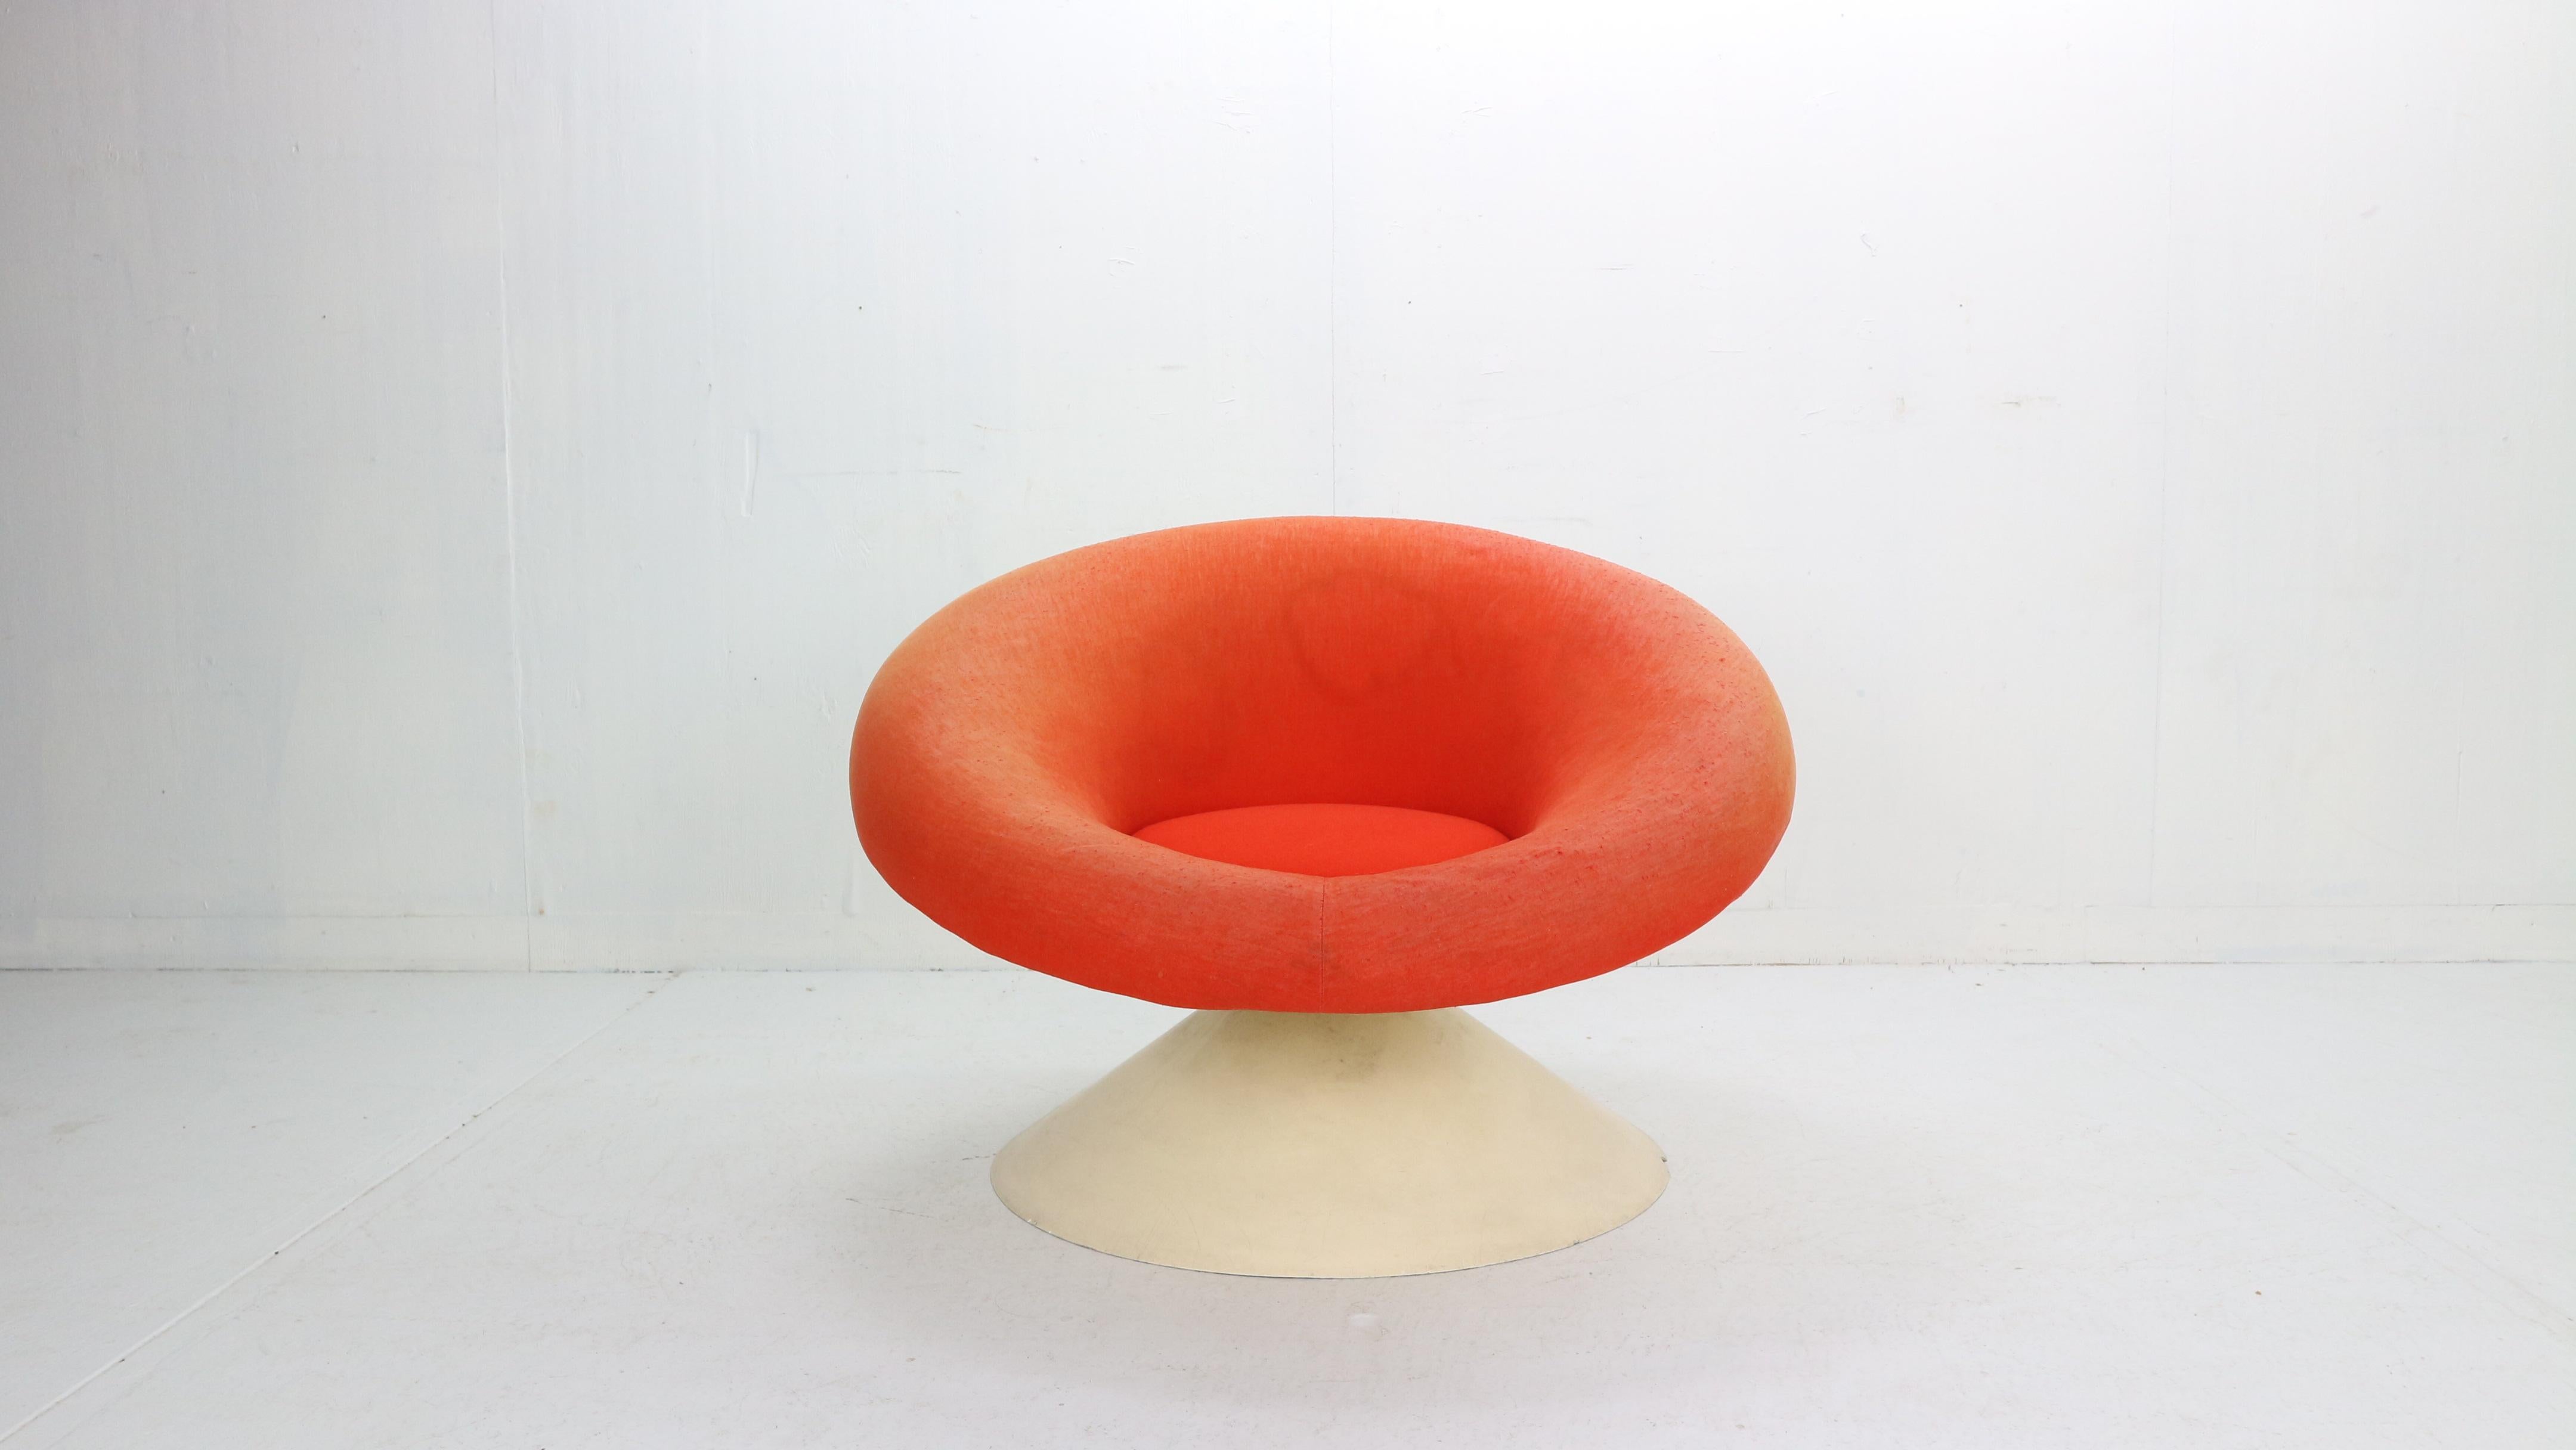 Space Age period very rare ‘Diabolo’ chair designed by Ben Swildens and manufactured for Stabin - N.V. Woerden in the, 1960s, Netherlands.
The base of this chair is made of fiberglass, inside the upper ‘cone’ is a fiberglass seating shell covered